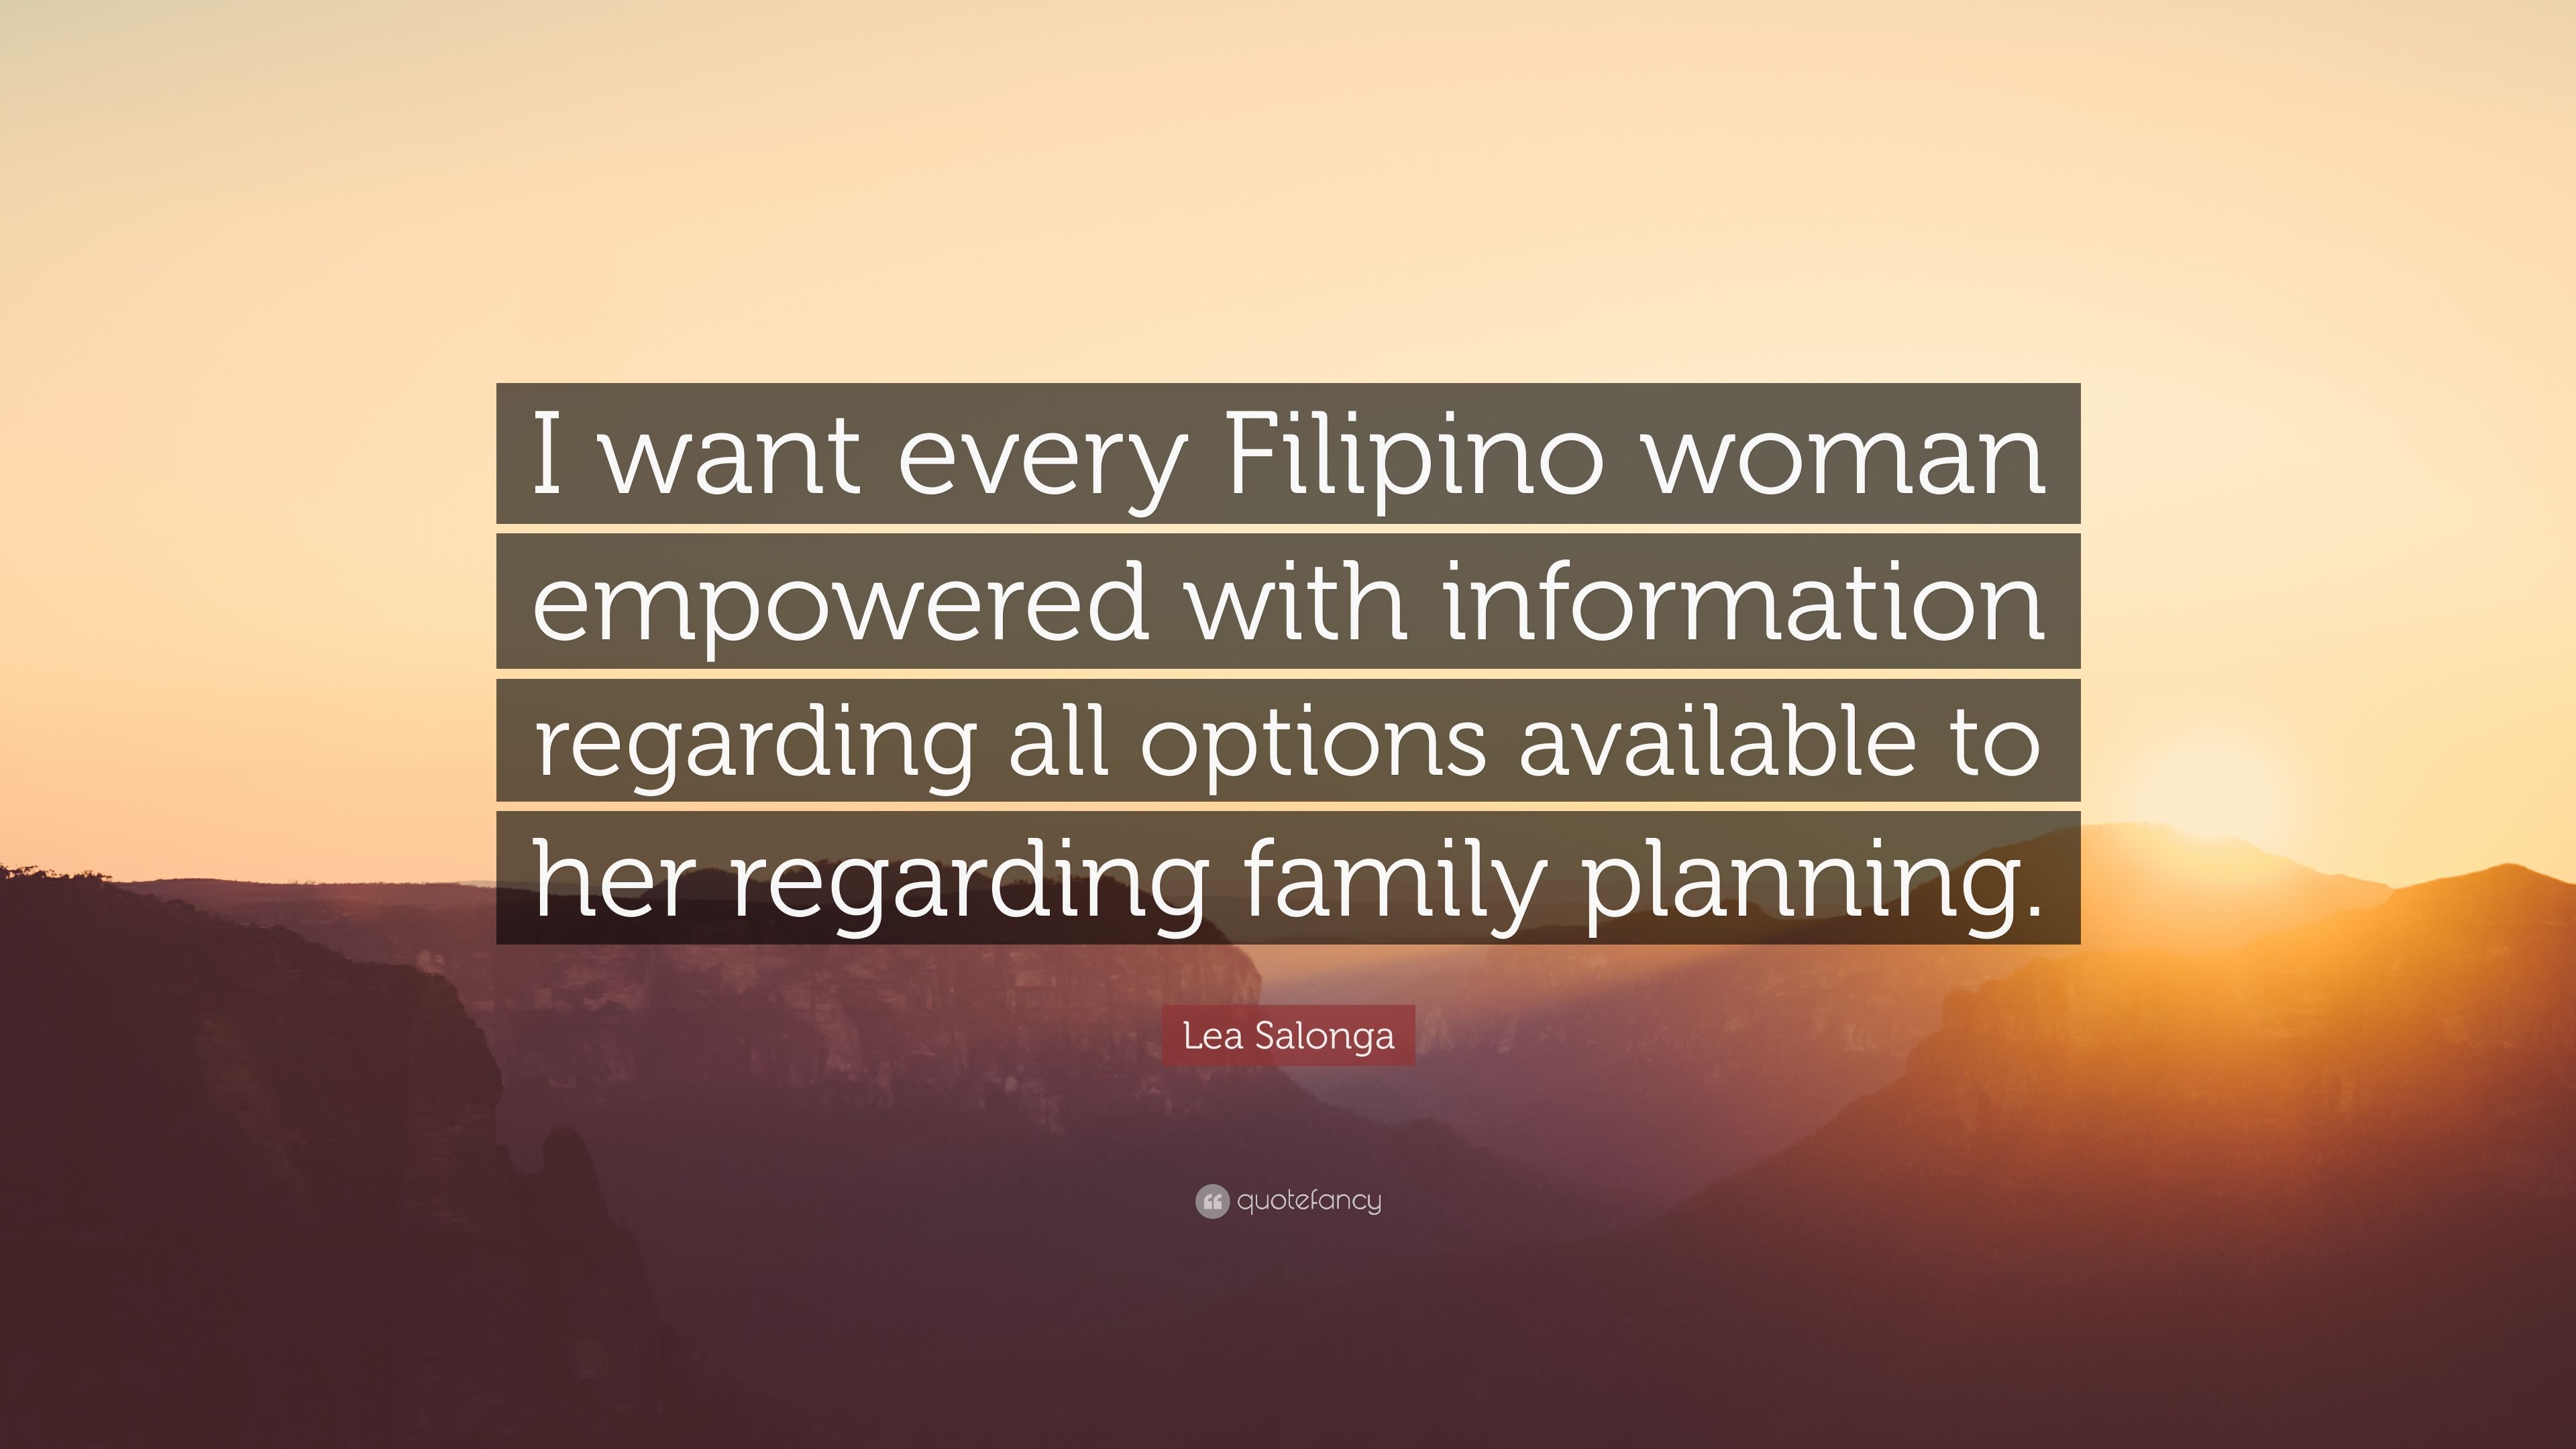 Lea Salonga Quote: “I want every Filipino woman empowered with information regarding all options available to her regarding family planning.”